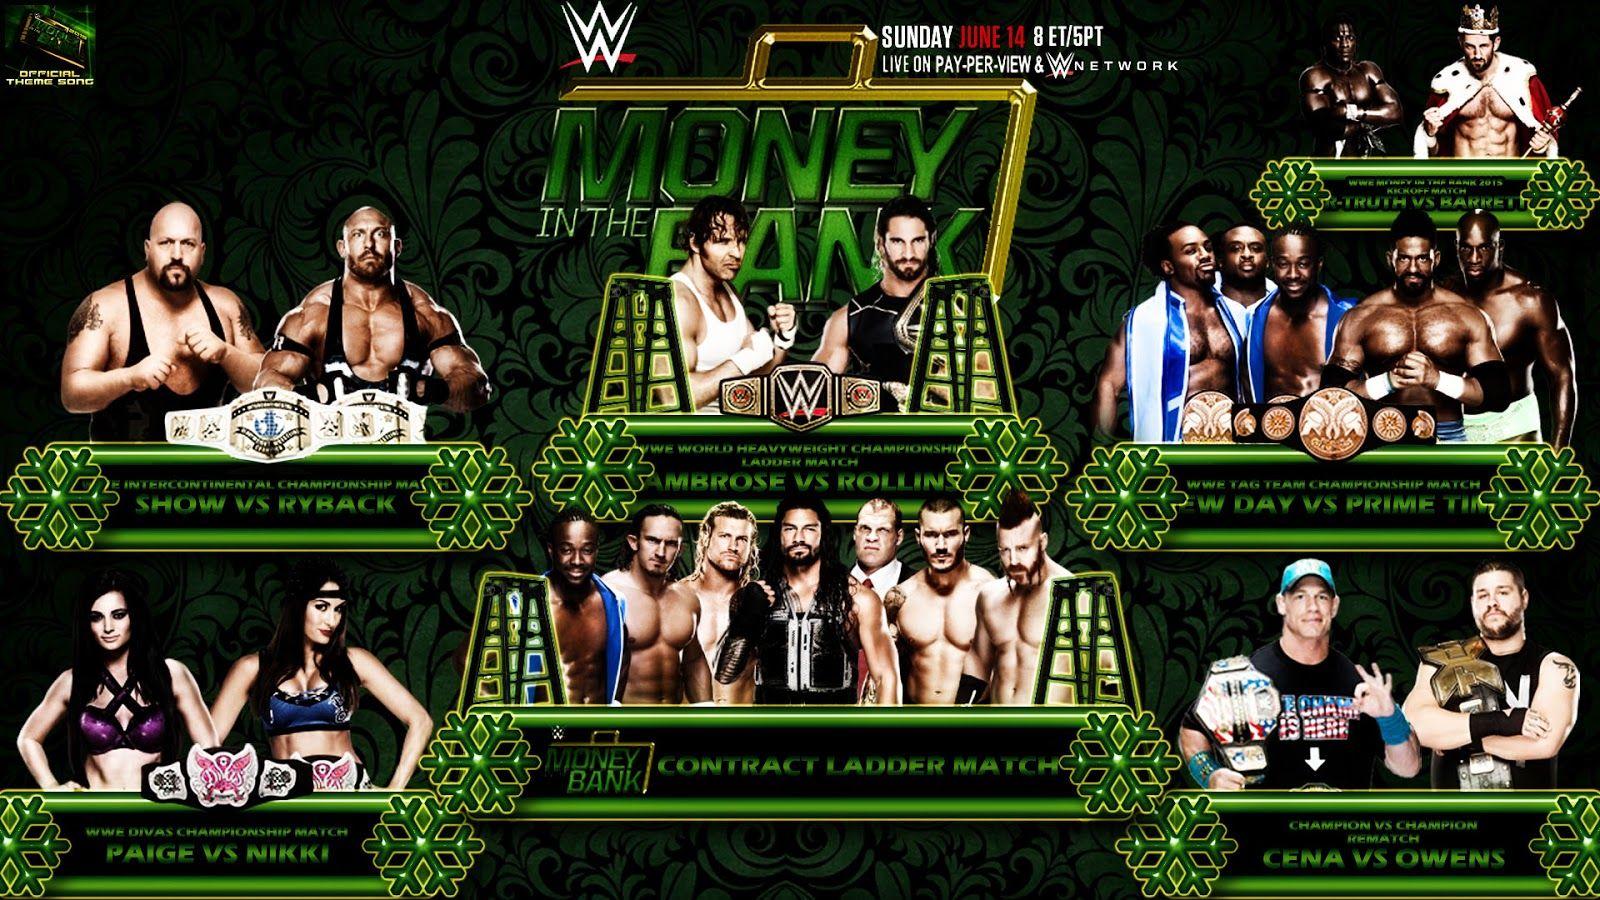 WWE Match Cards Wallpaper: WWE Money in the Bank 2015